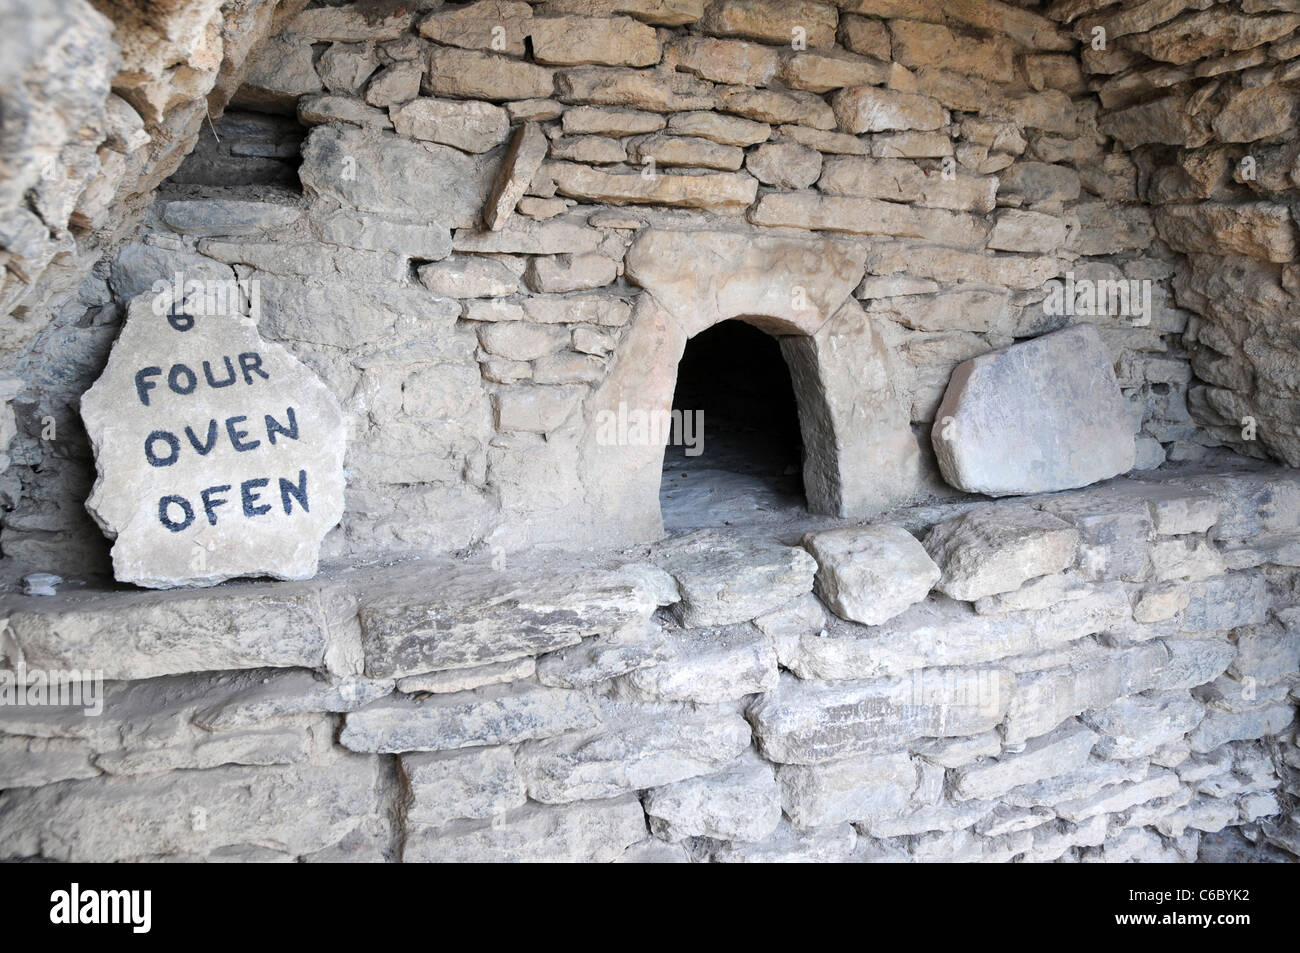 Ancient oven in hut made from stones in The Bories Village, near Gordes in Provence region, France Stock Photo